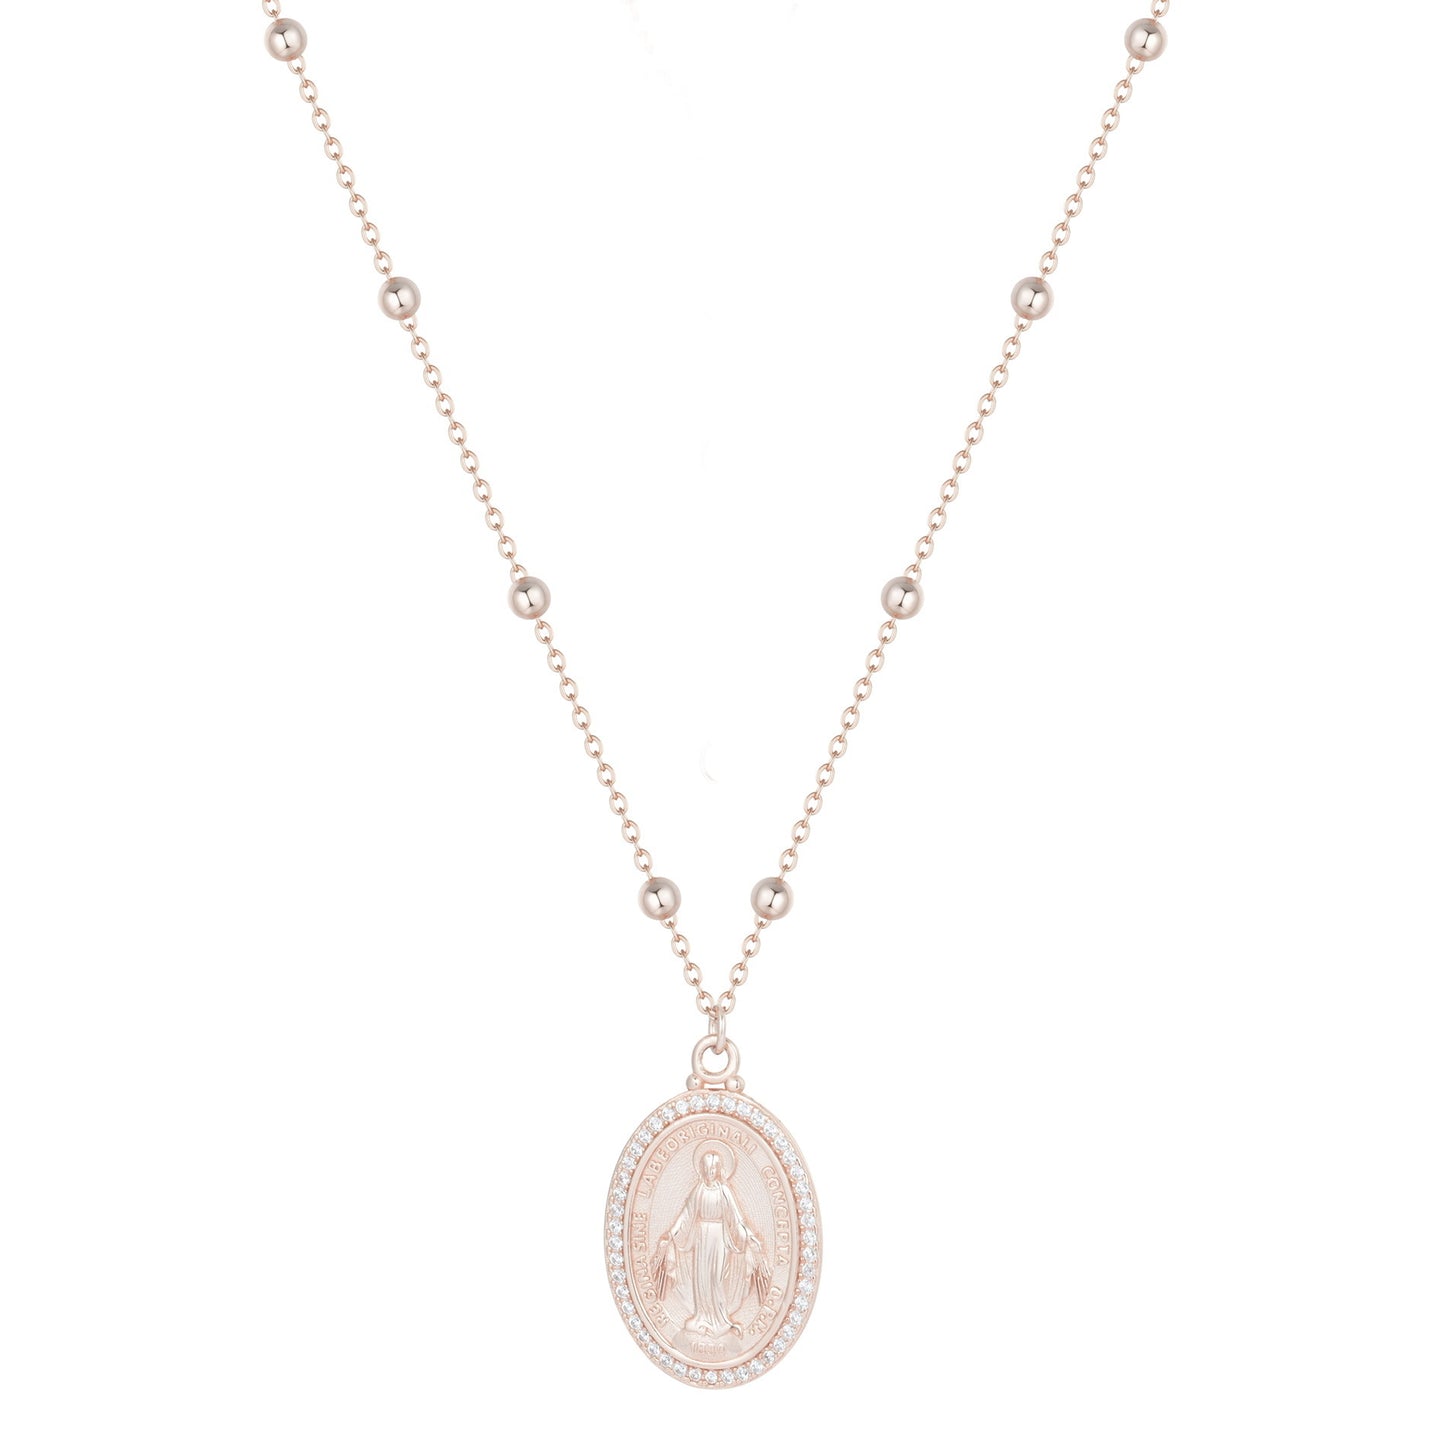 MARY CRYSTAL ROSE GOLD BEADED NECKLACE